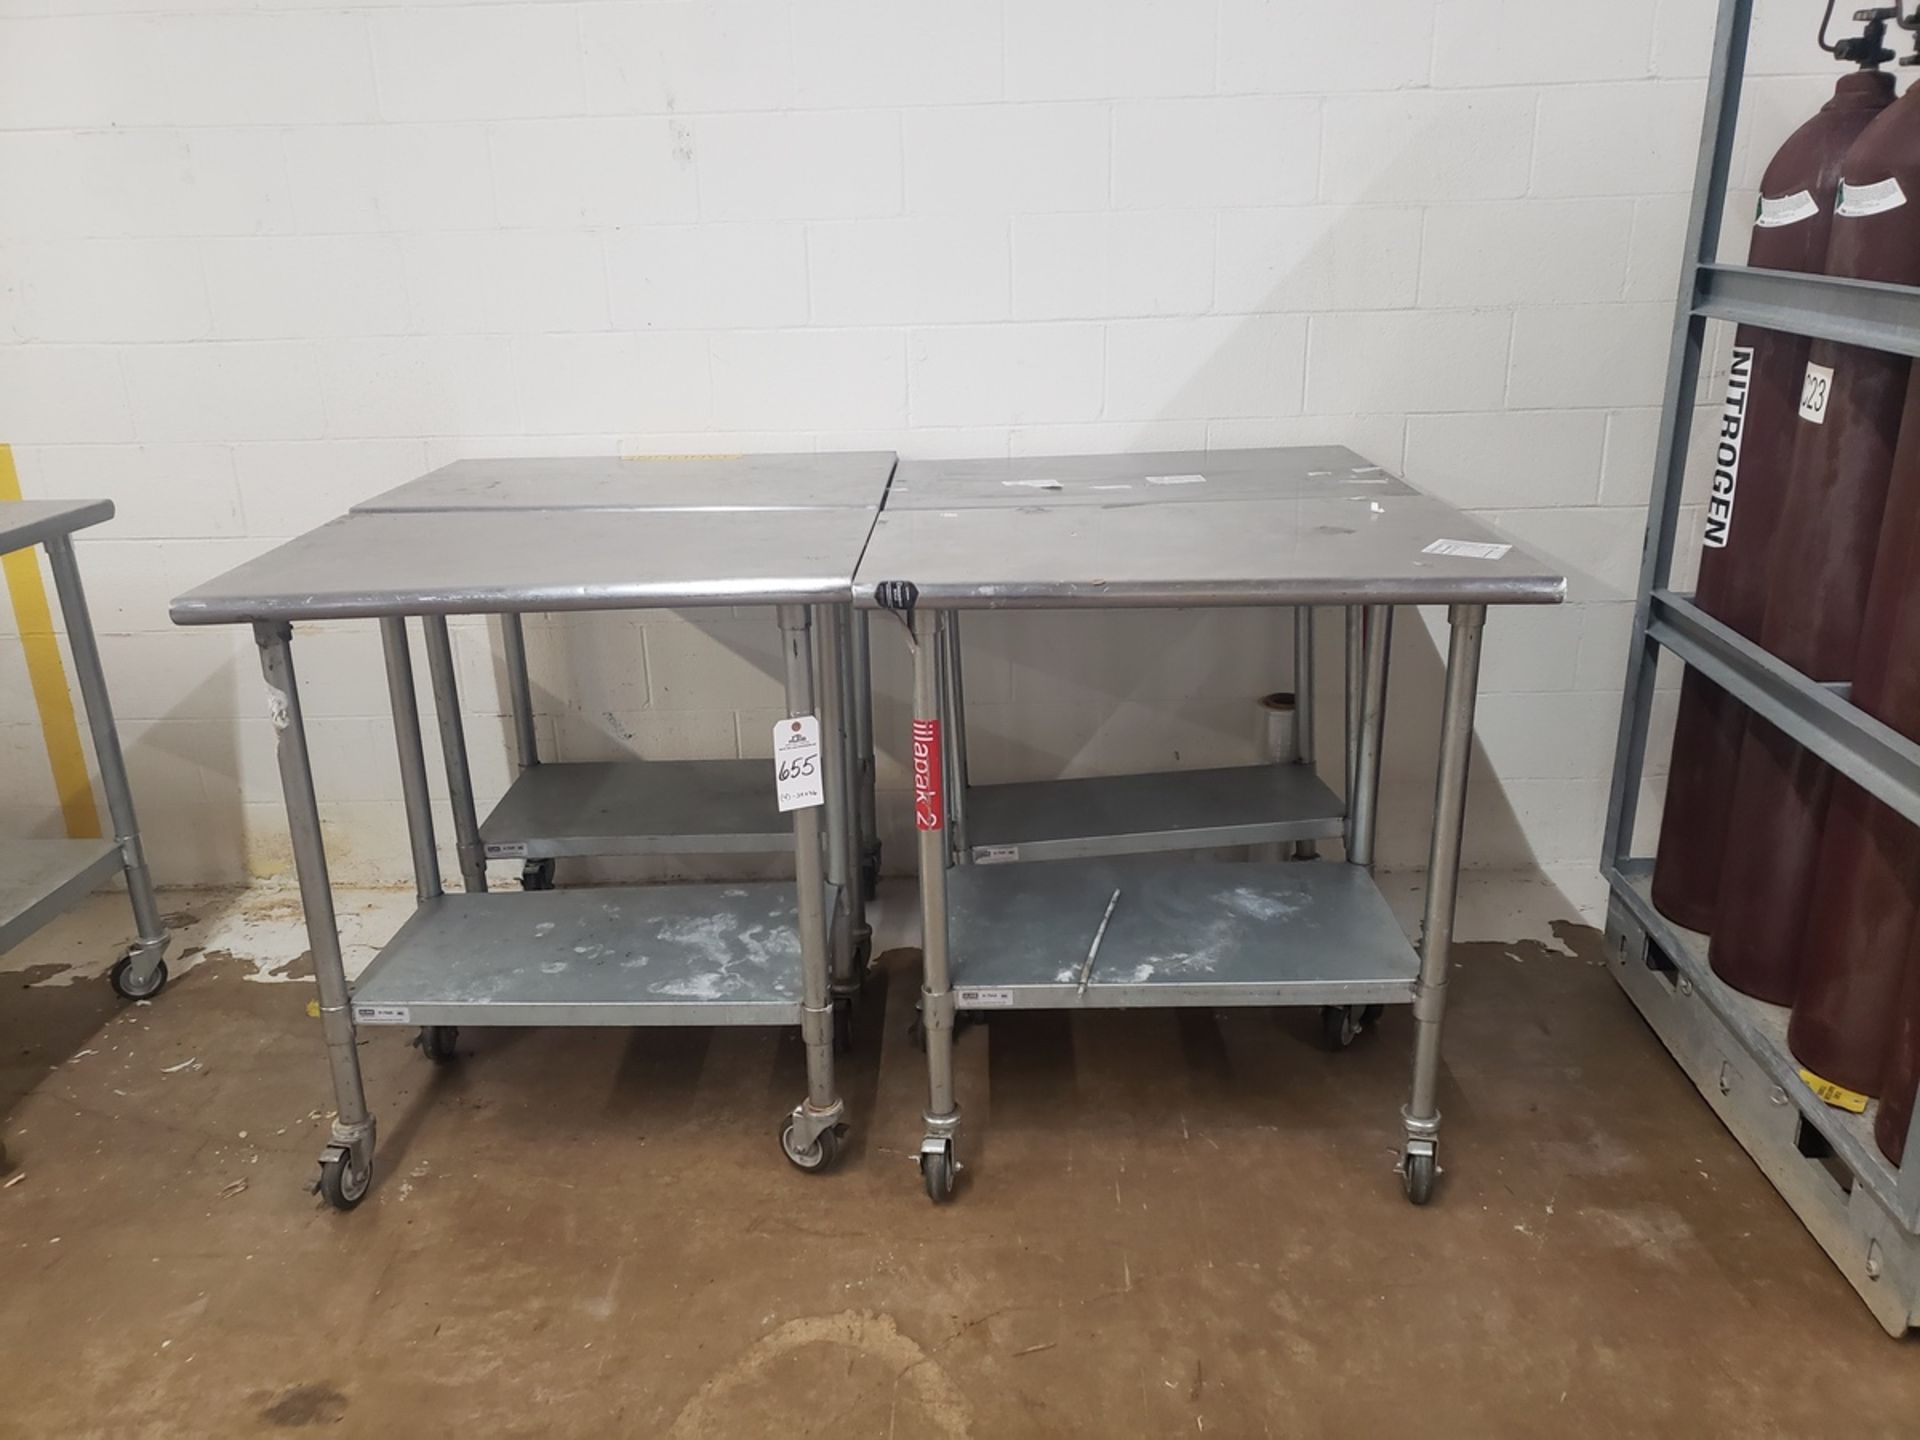 Lot of (4) Stainless Steel Tables, 24" x 36"